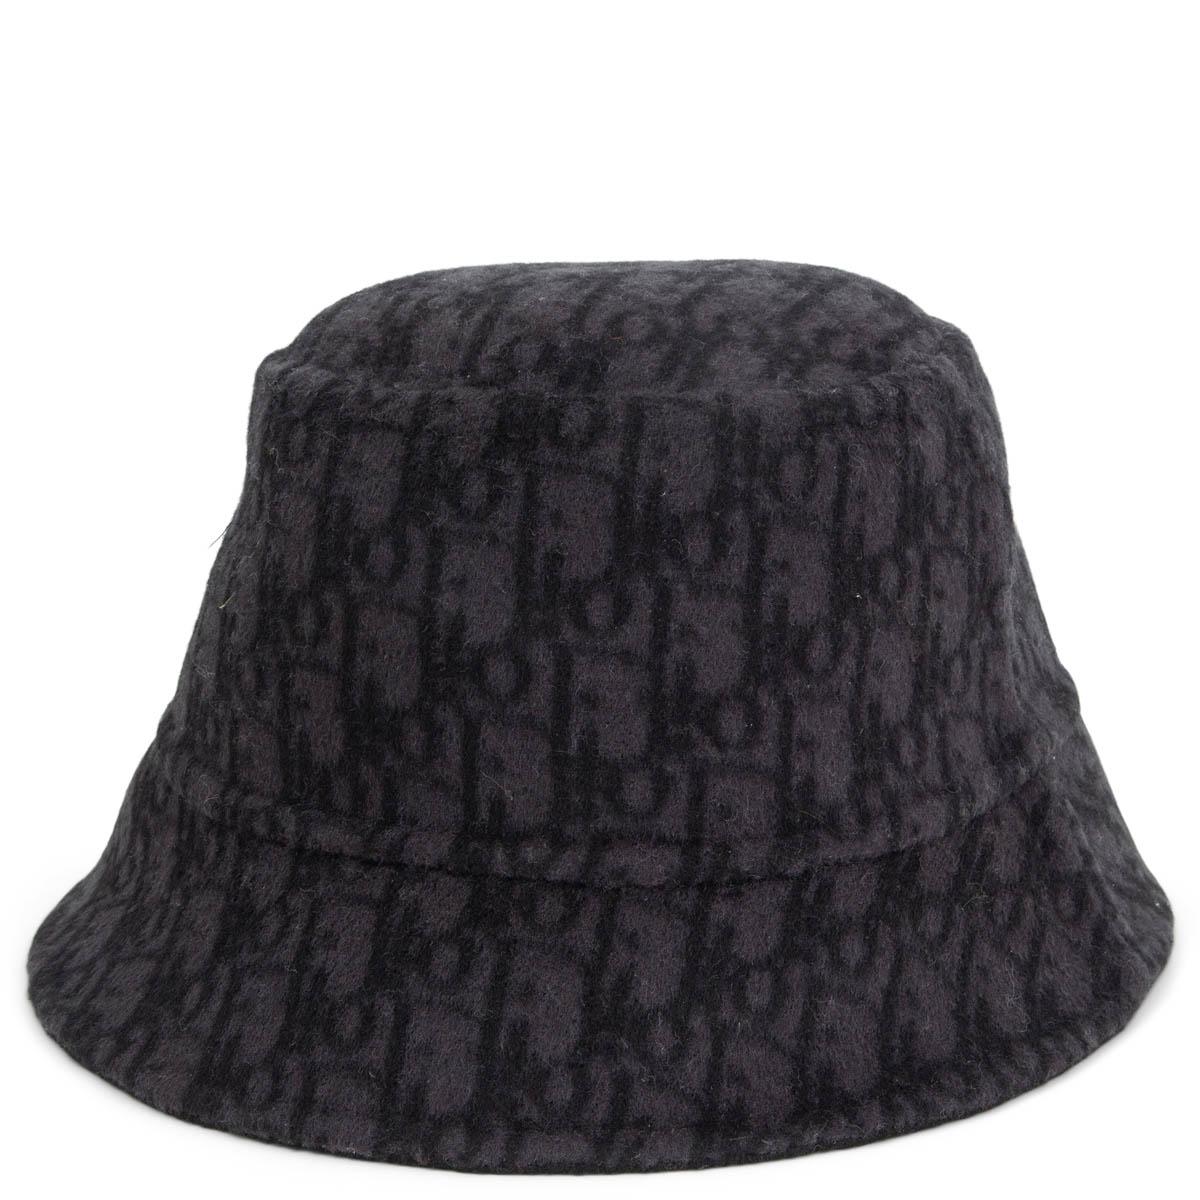 100% authentic Christian Dior Oblique reversible small brim bucket hat in black and dark grey wool (99%) and silk (1%). Has been worn once and is in virtually new condition. Comes with dust bag. 

Measurements
Tag Size	58
Inside Circumference	58cm